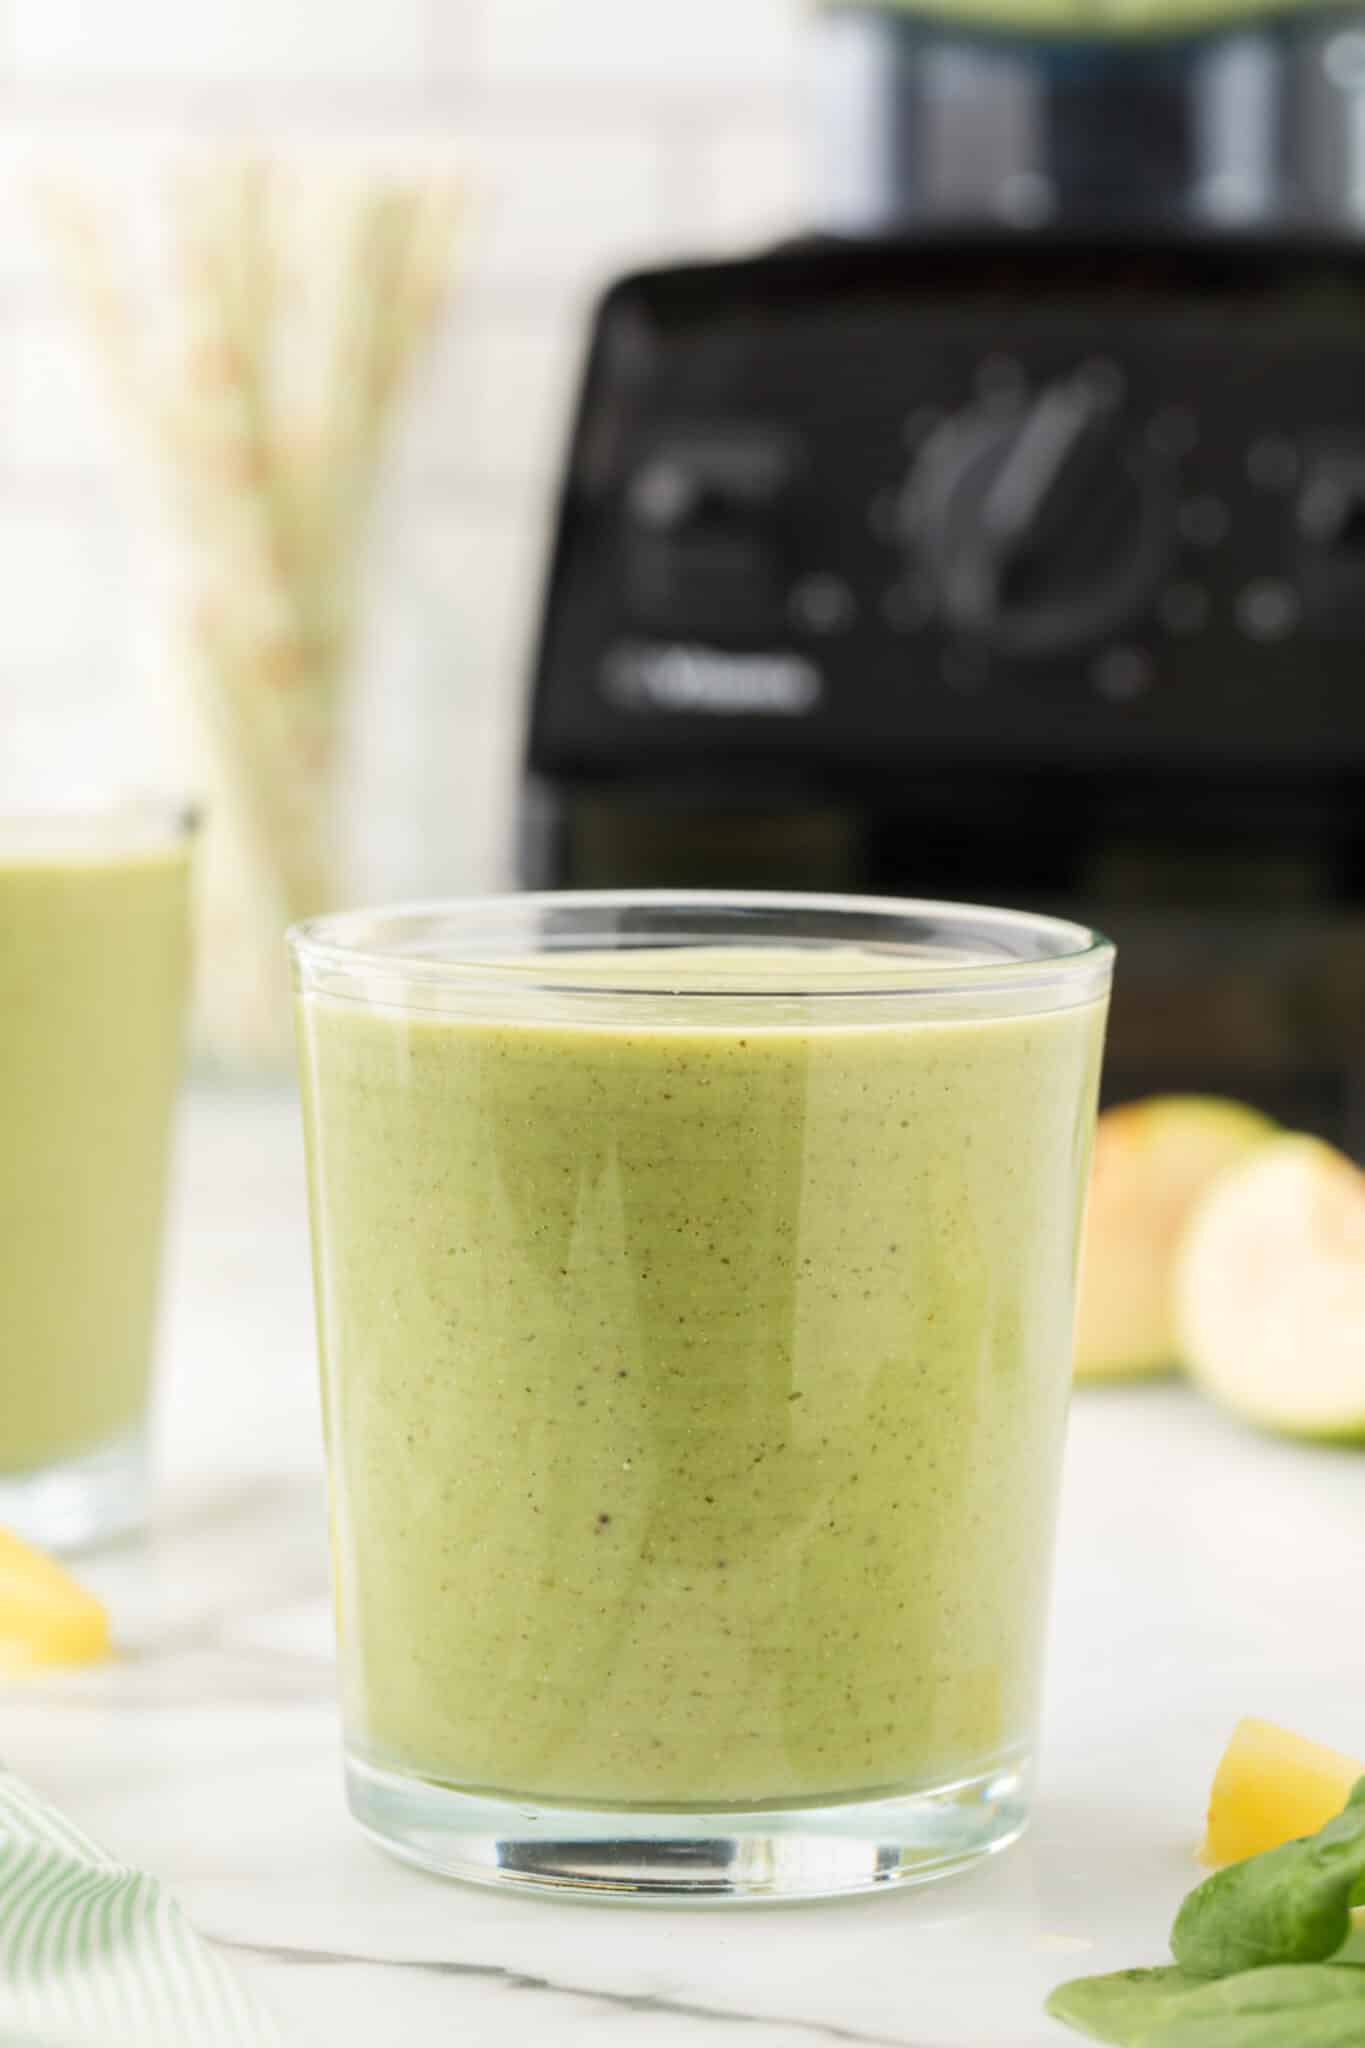 A short glass filled with banana spinach smoothie.